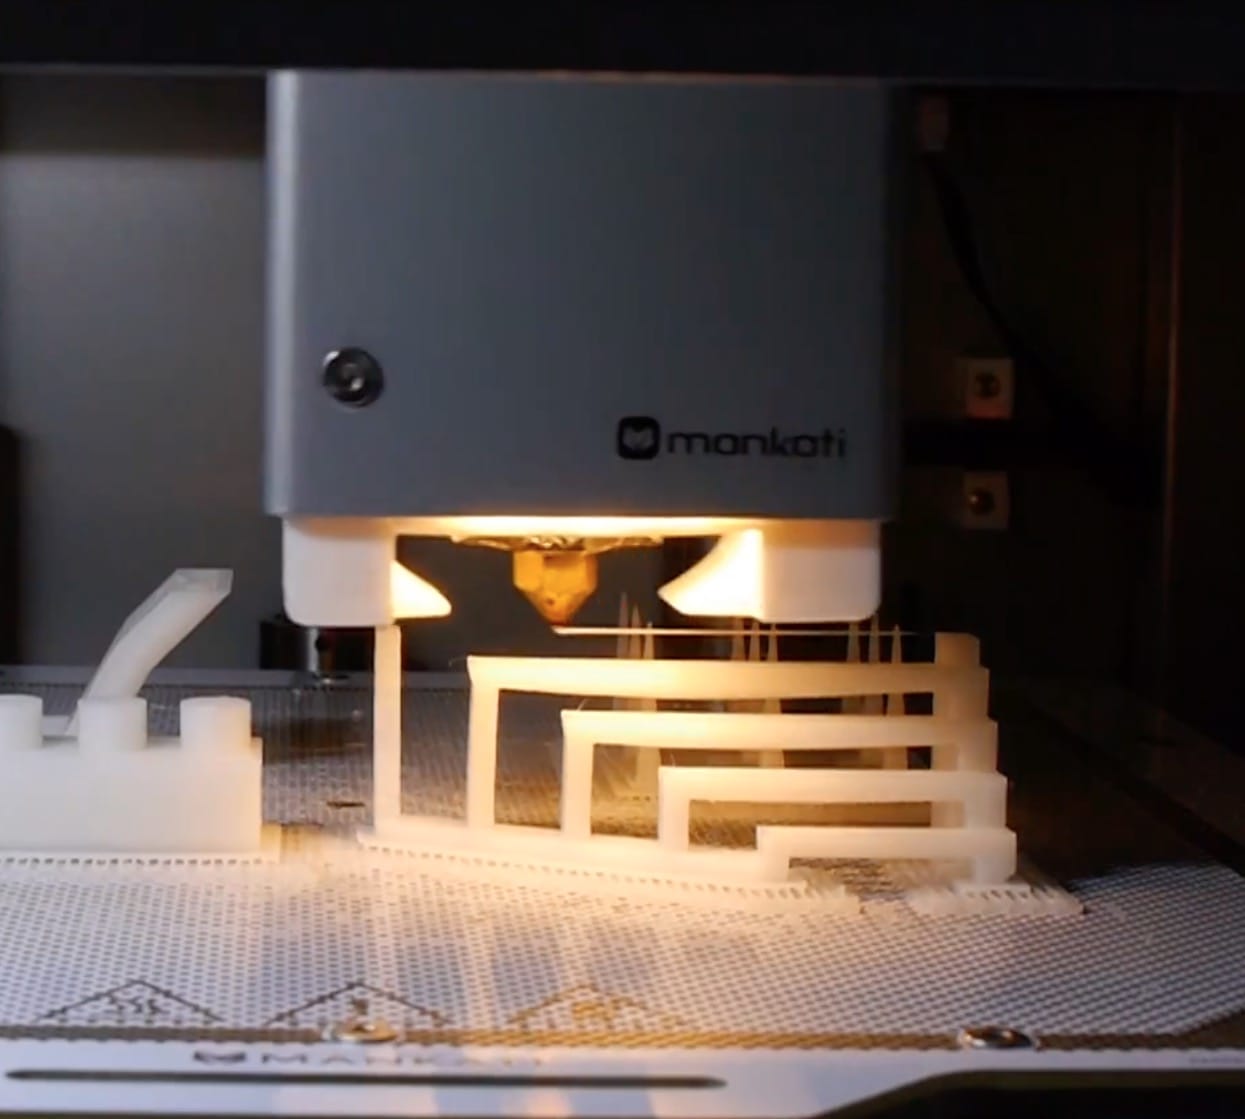  Check out the hot end nozzle, where it is successfully printing a rather long bridge structure 